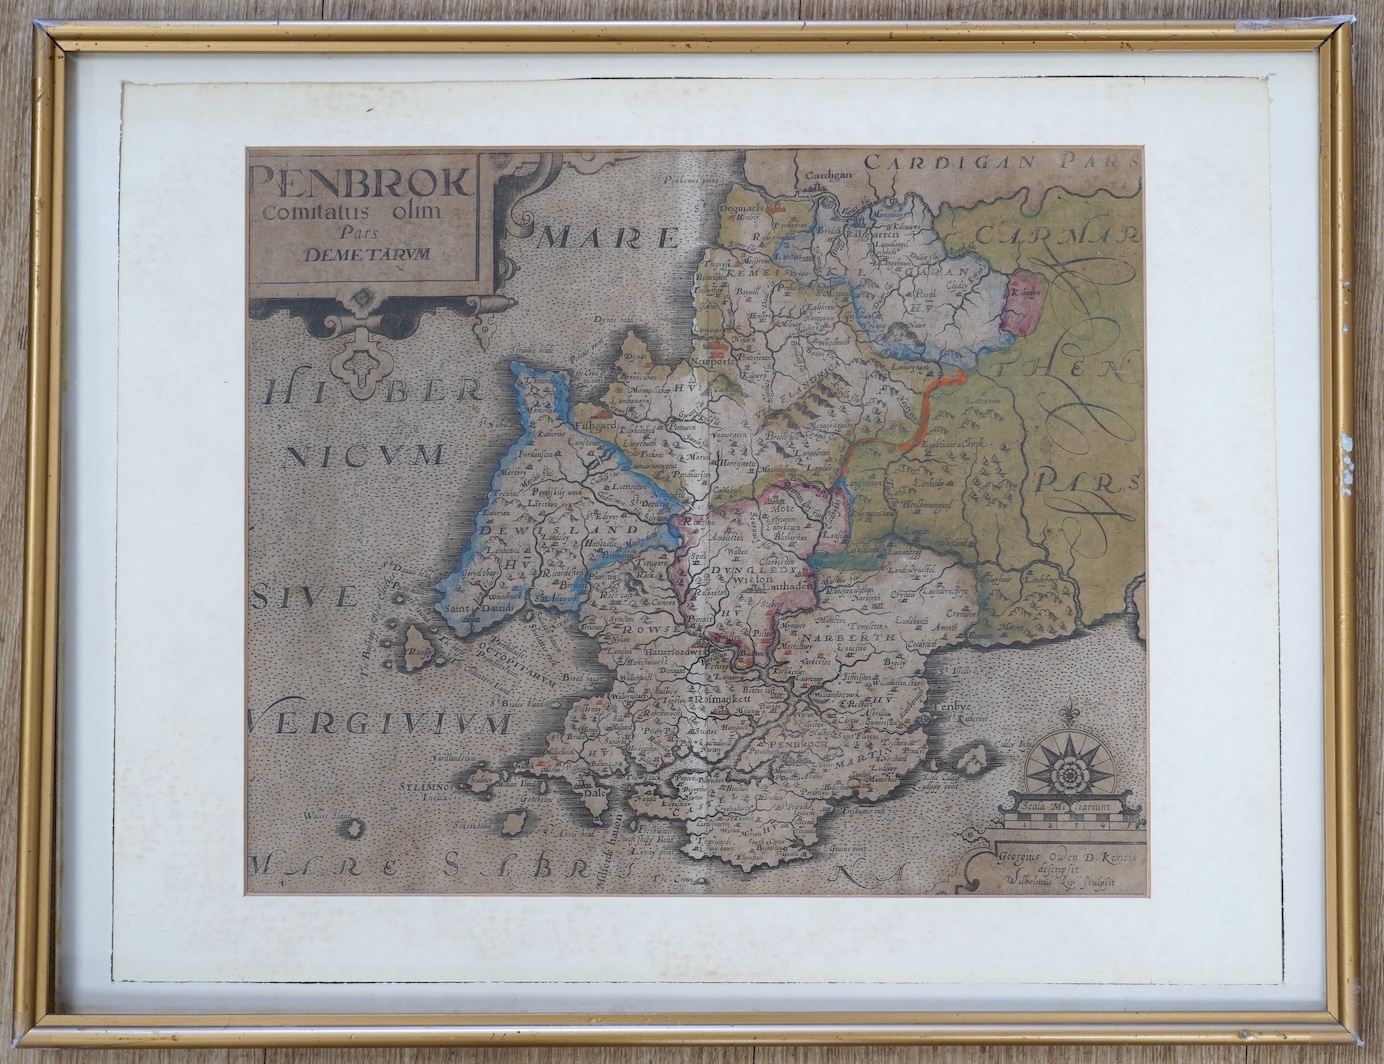 George Owen and William Kip, hand coloured engraved map of Pembroke (Penbrok), 27 x 32cm. Condition - poor, discolouration and fading all over